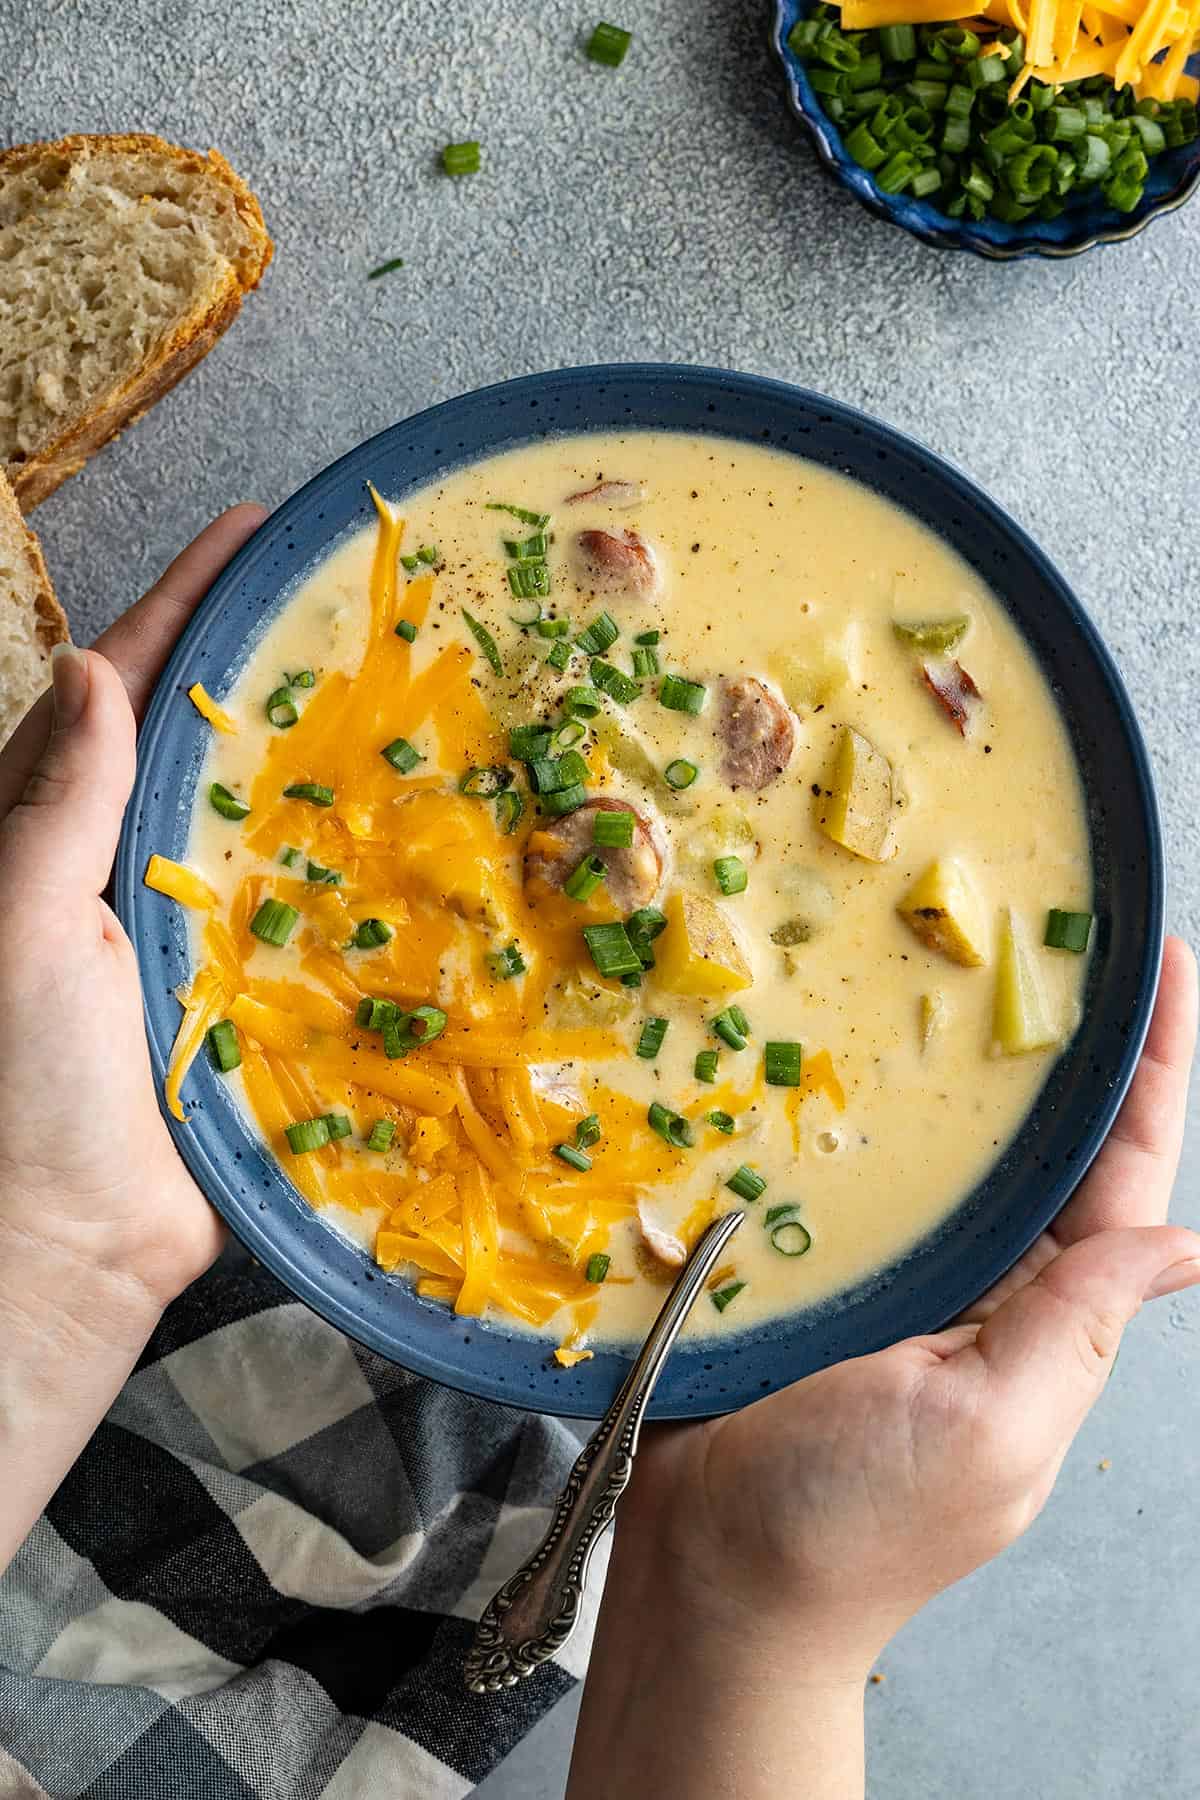 Hands holding a bowl of cajun potato soup garnished with cheese and green onion.